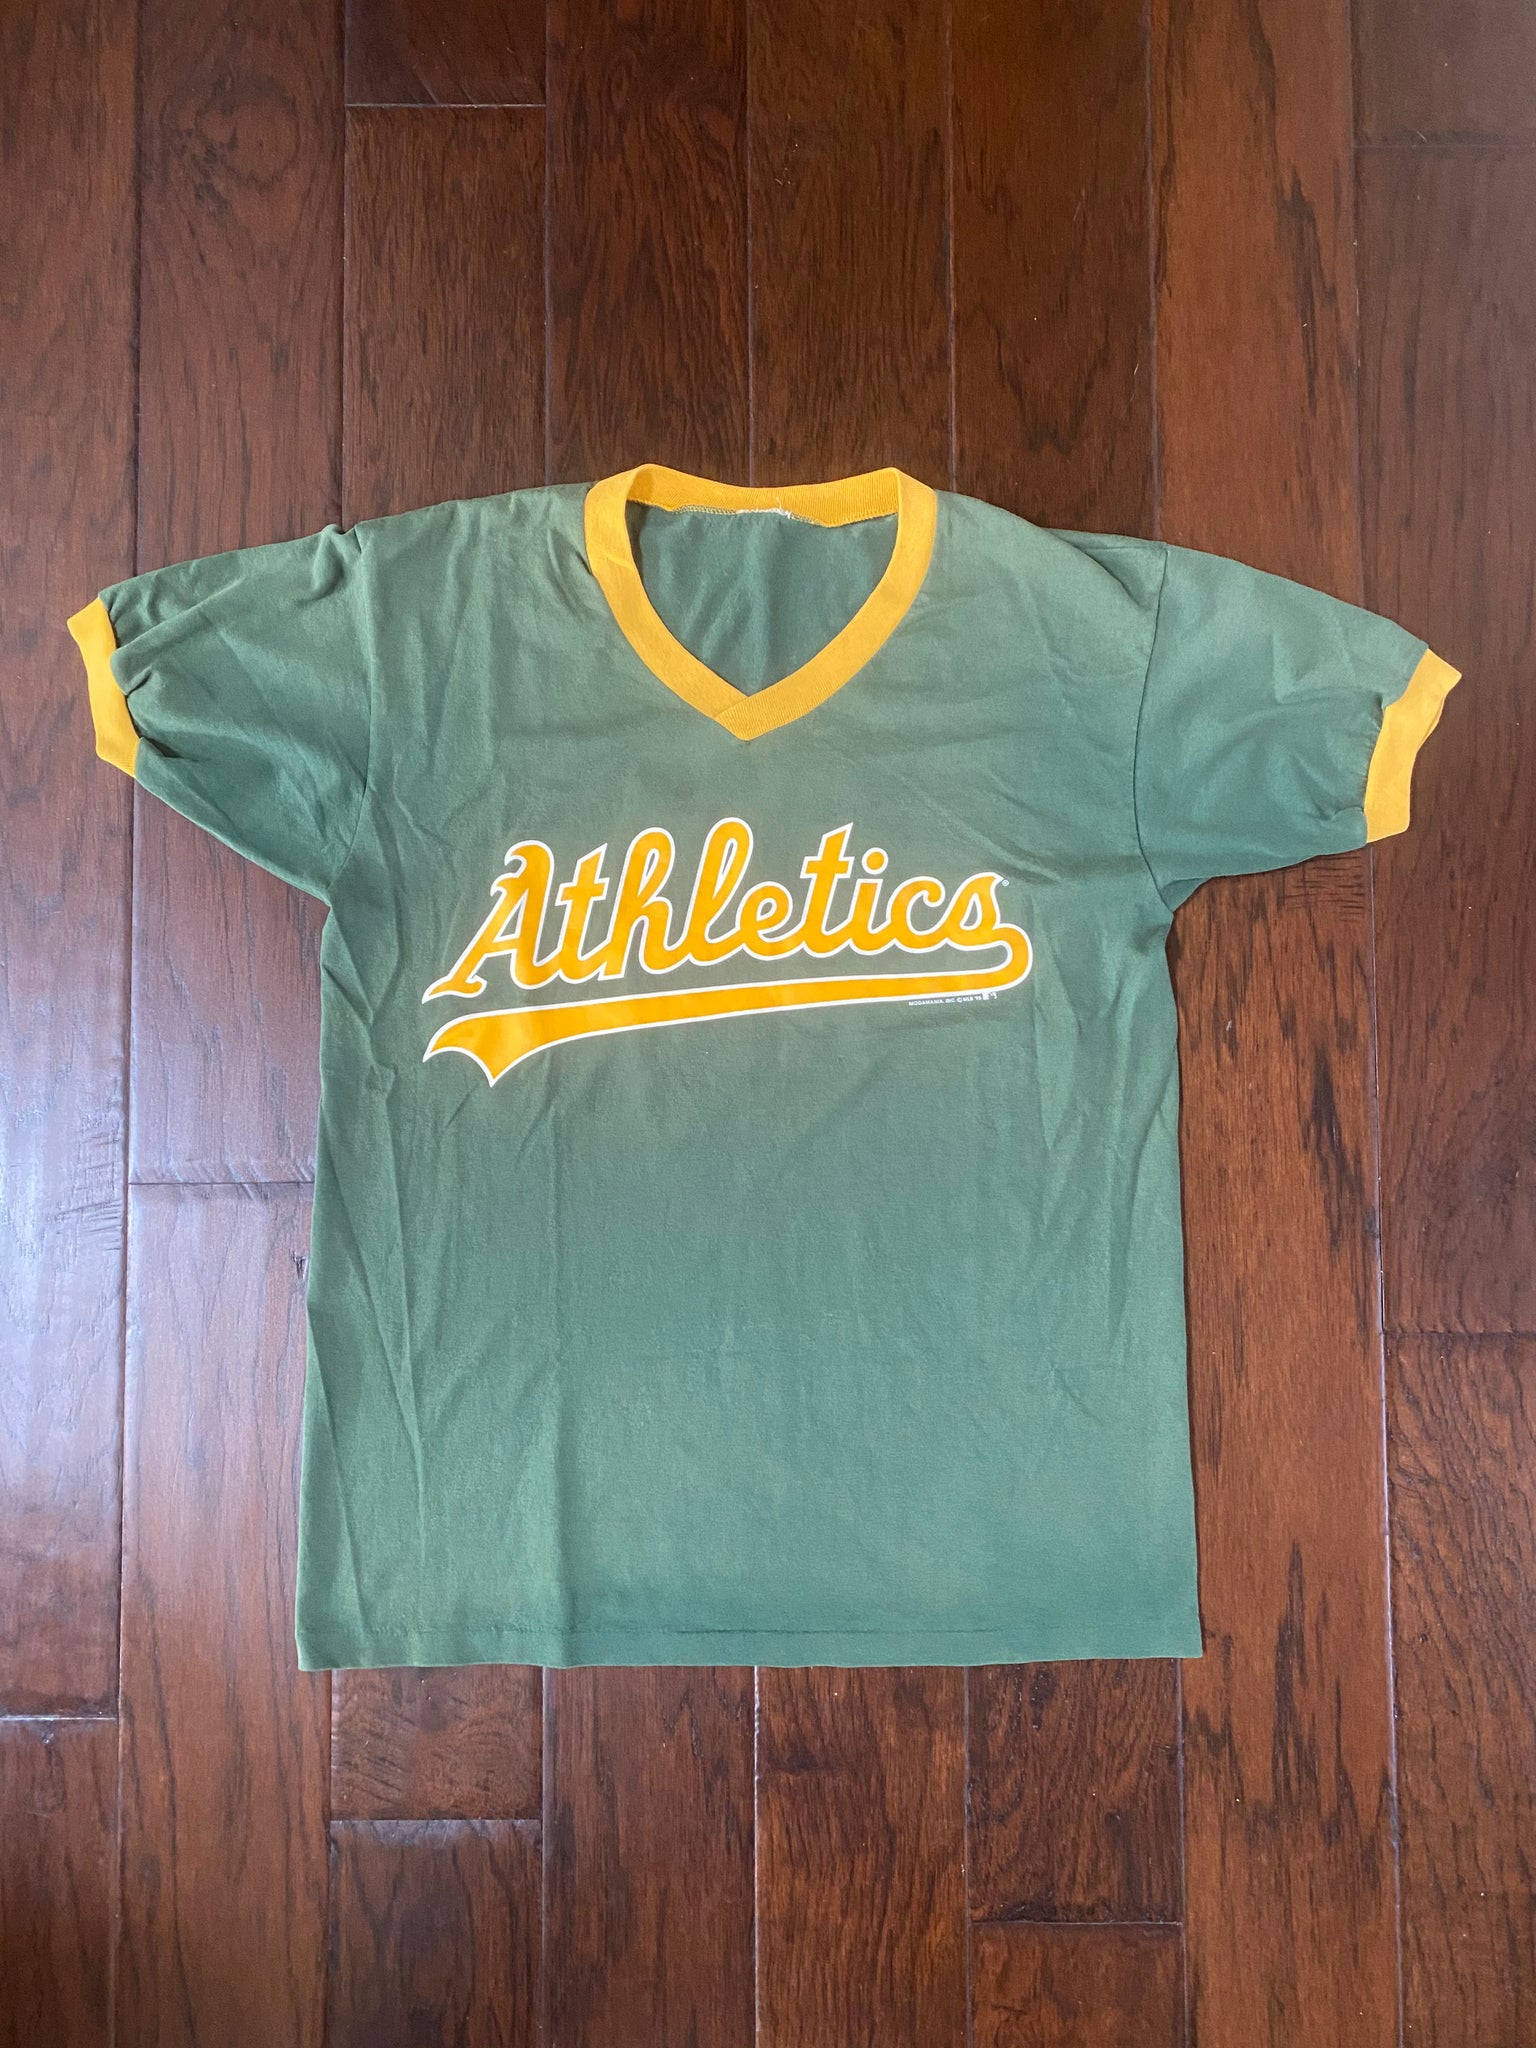 Oakland Athletics 1995 Vintage Distressed Jersey T-shirt – The